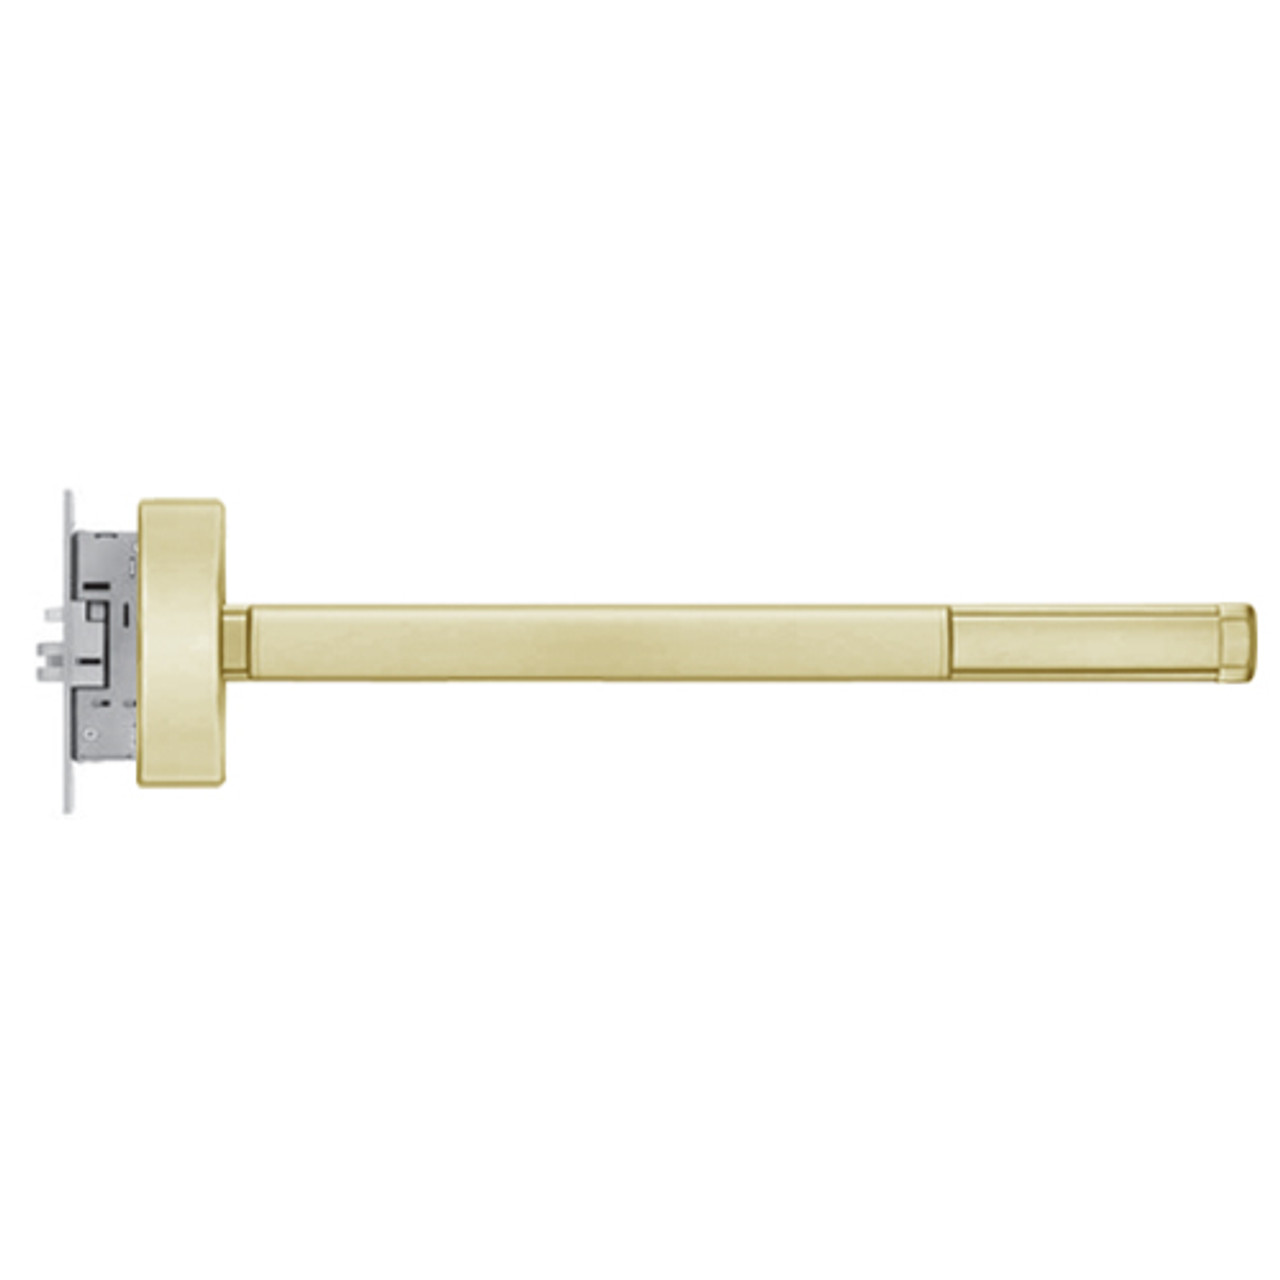 DEFL2305-RHR-606-48 PHI 2300 Series Fire Rated Apex Mortise Exit Device with Delayed Egress Prepped for Key Controls Thumb Piece in Satin Brass Finish